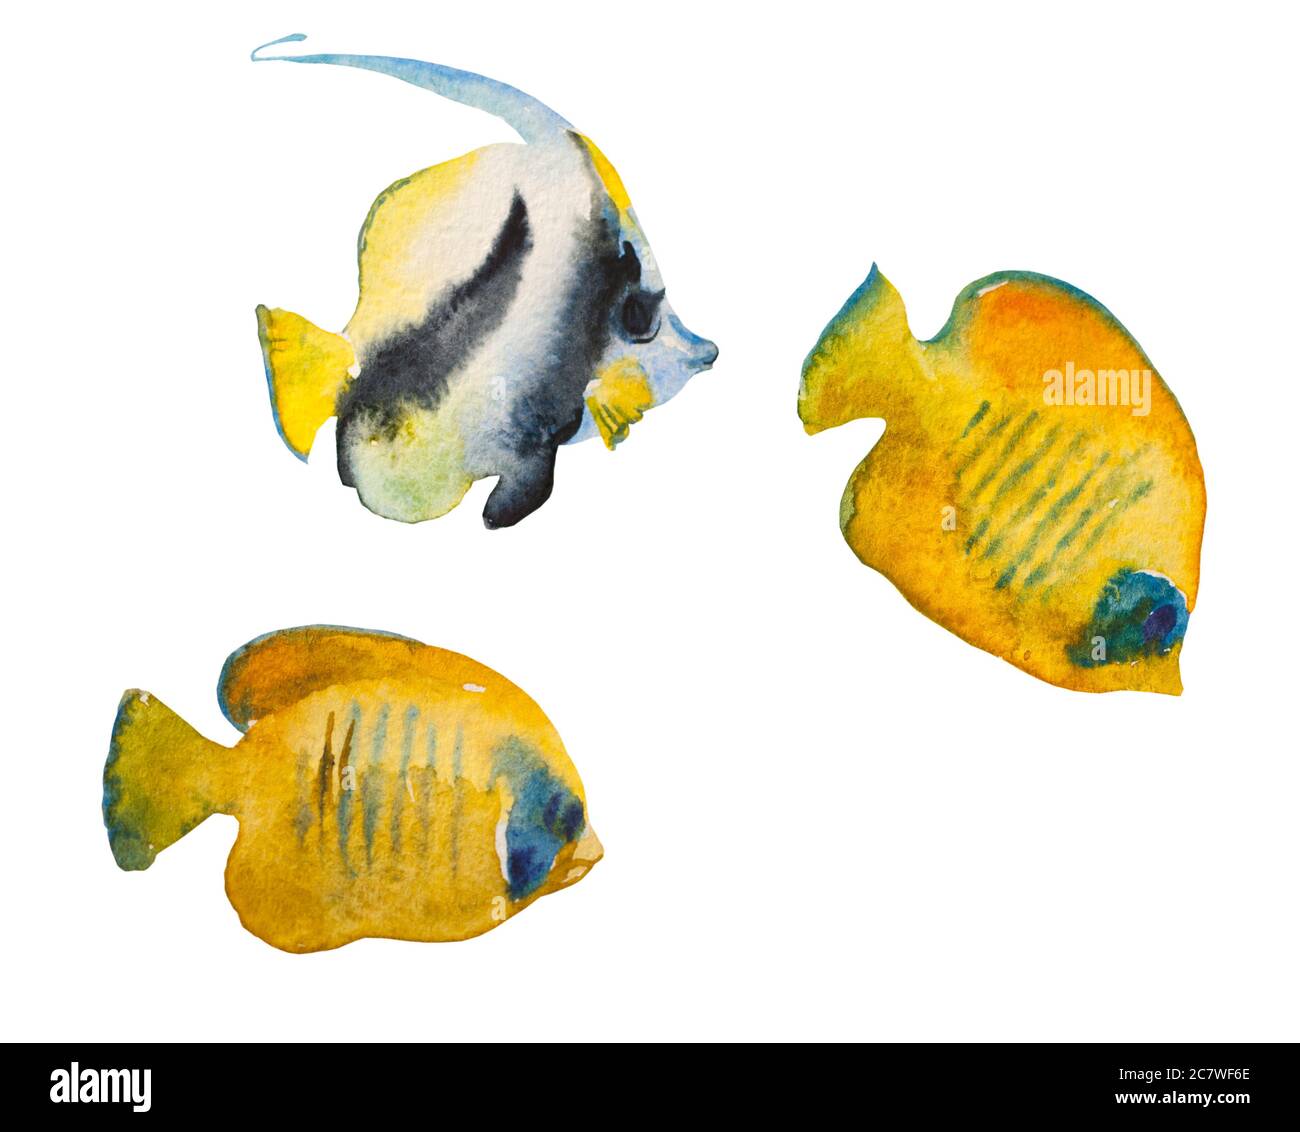 The Heniochus Black and White Butterflyfish, also known as Longfin Bannerfish, and two Masked butterfly fishes, Chaetodon semilarvatus in watercolor Stock Photo